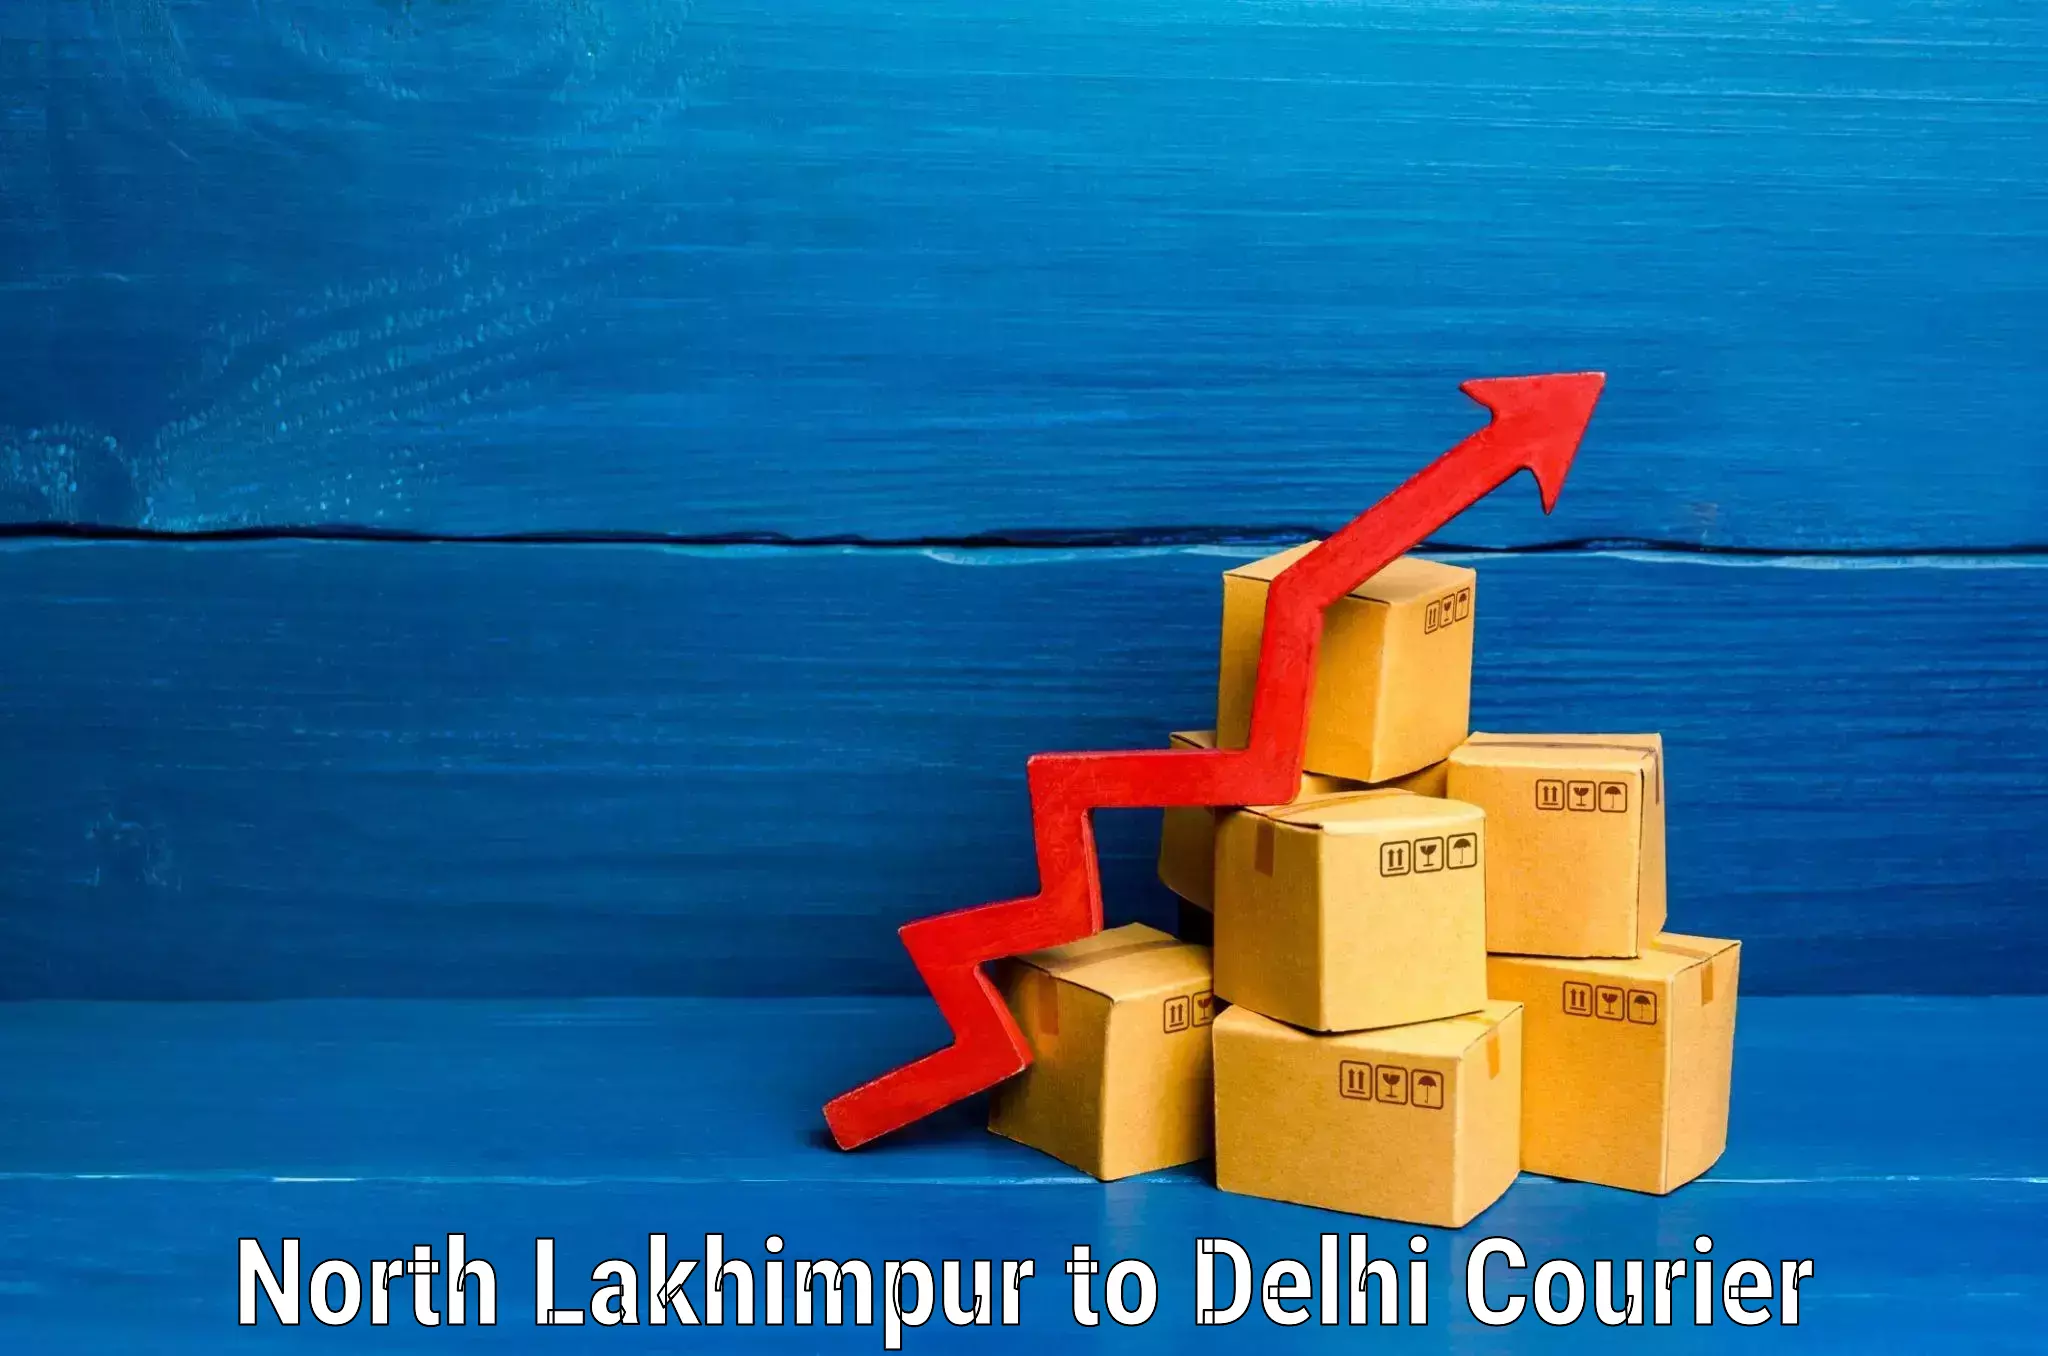 Personal effects shipping North Lakhimpur to NCR